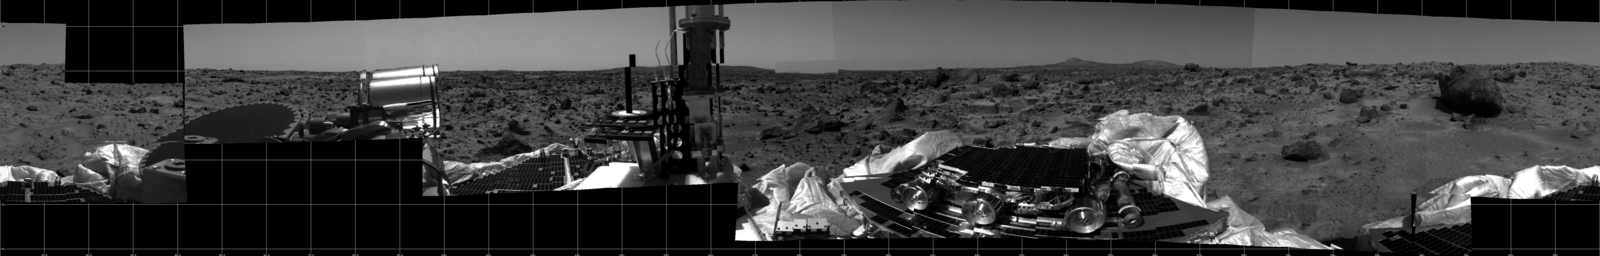 This photomosaic was taken by the Imager for Mars Pathfinder (IMP) camera on July 4, 1997 between 4:00-4:30 p.m. PDT. The foreground is dominated by the lander, newly renamed the Sagan Memorial Station after the late Dr. Carl Sagan.